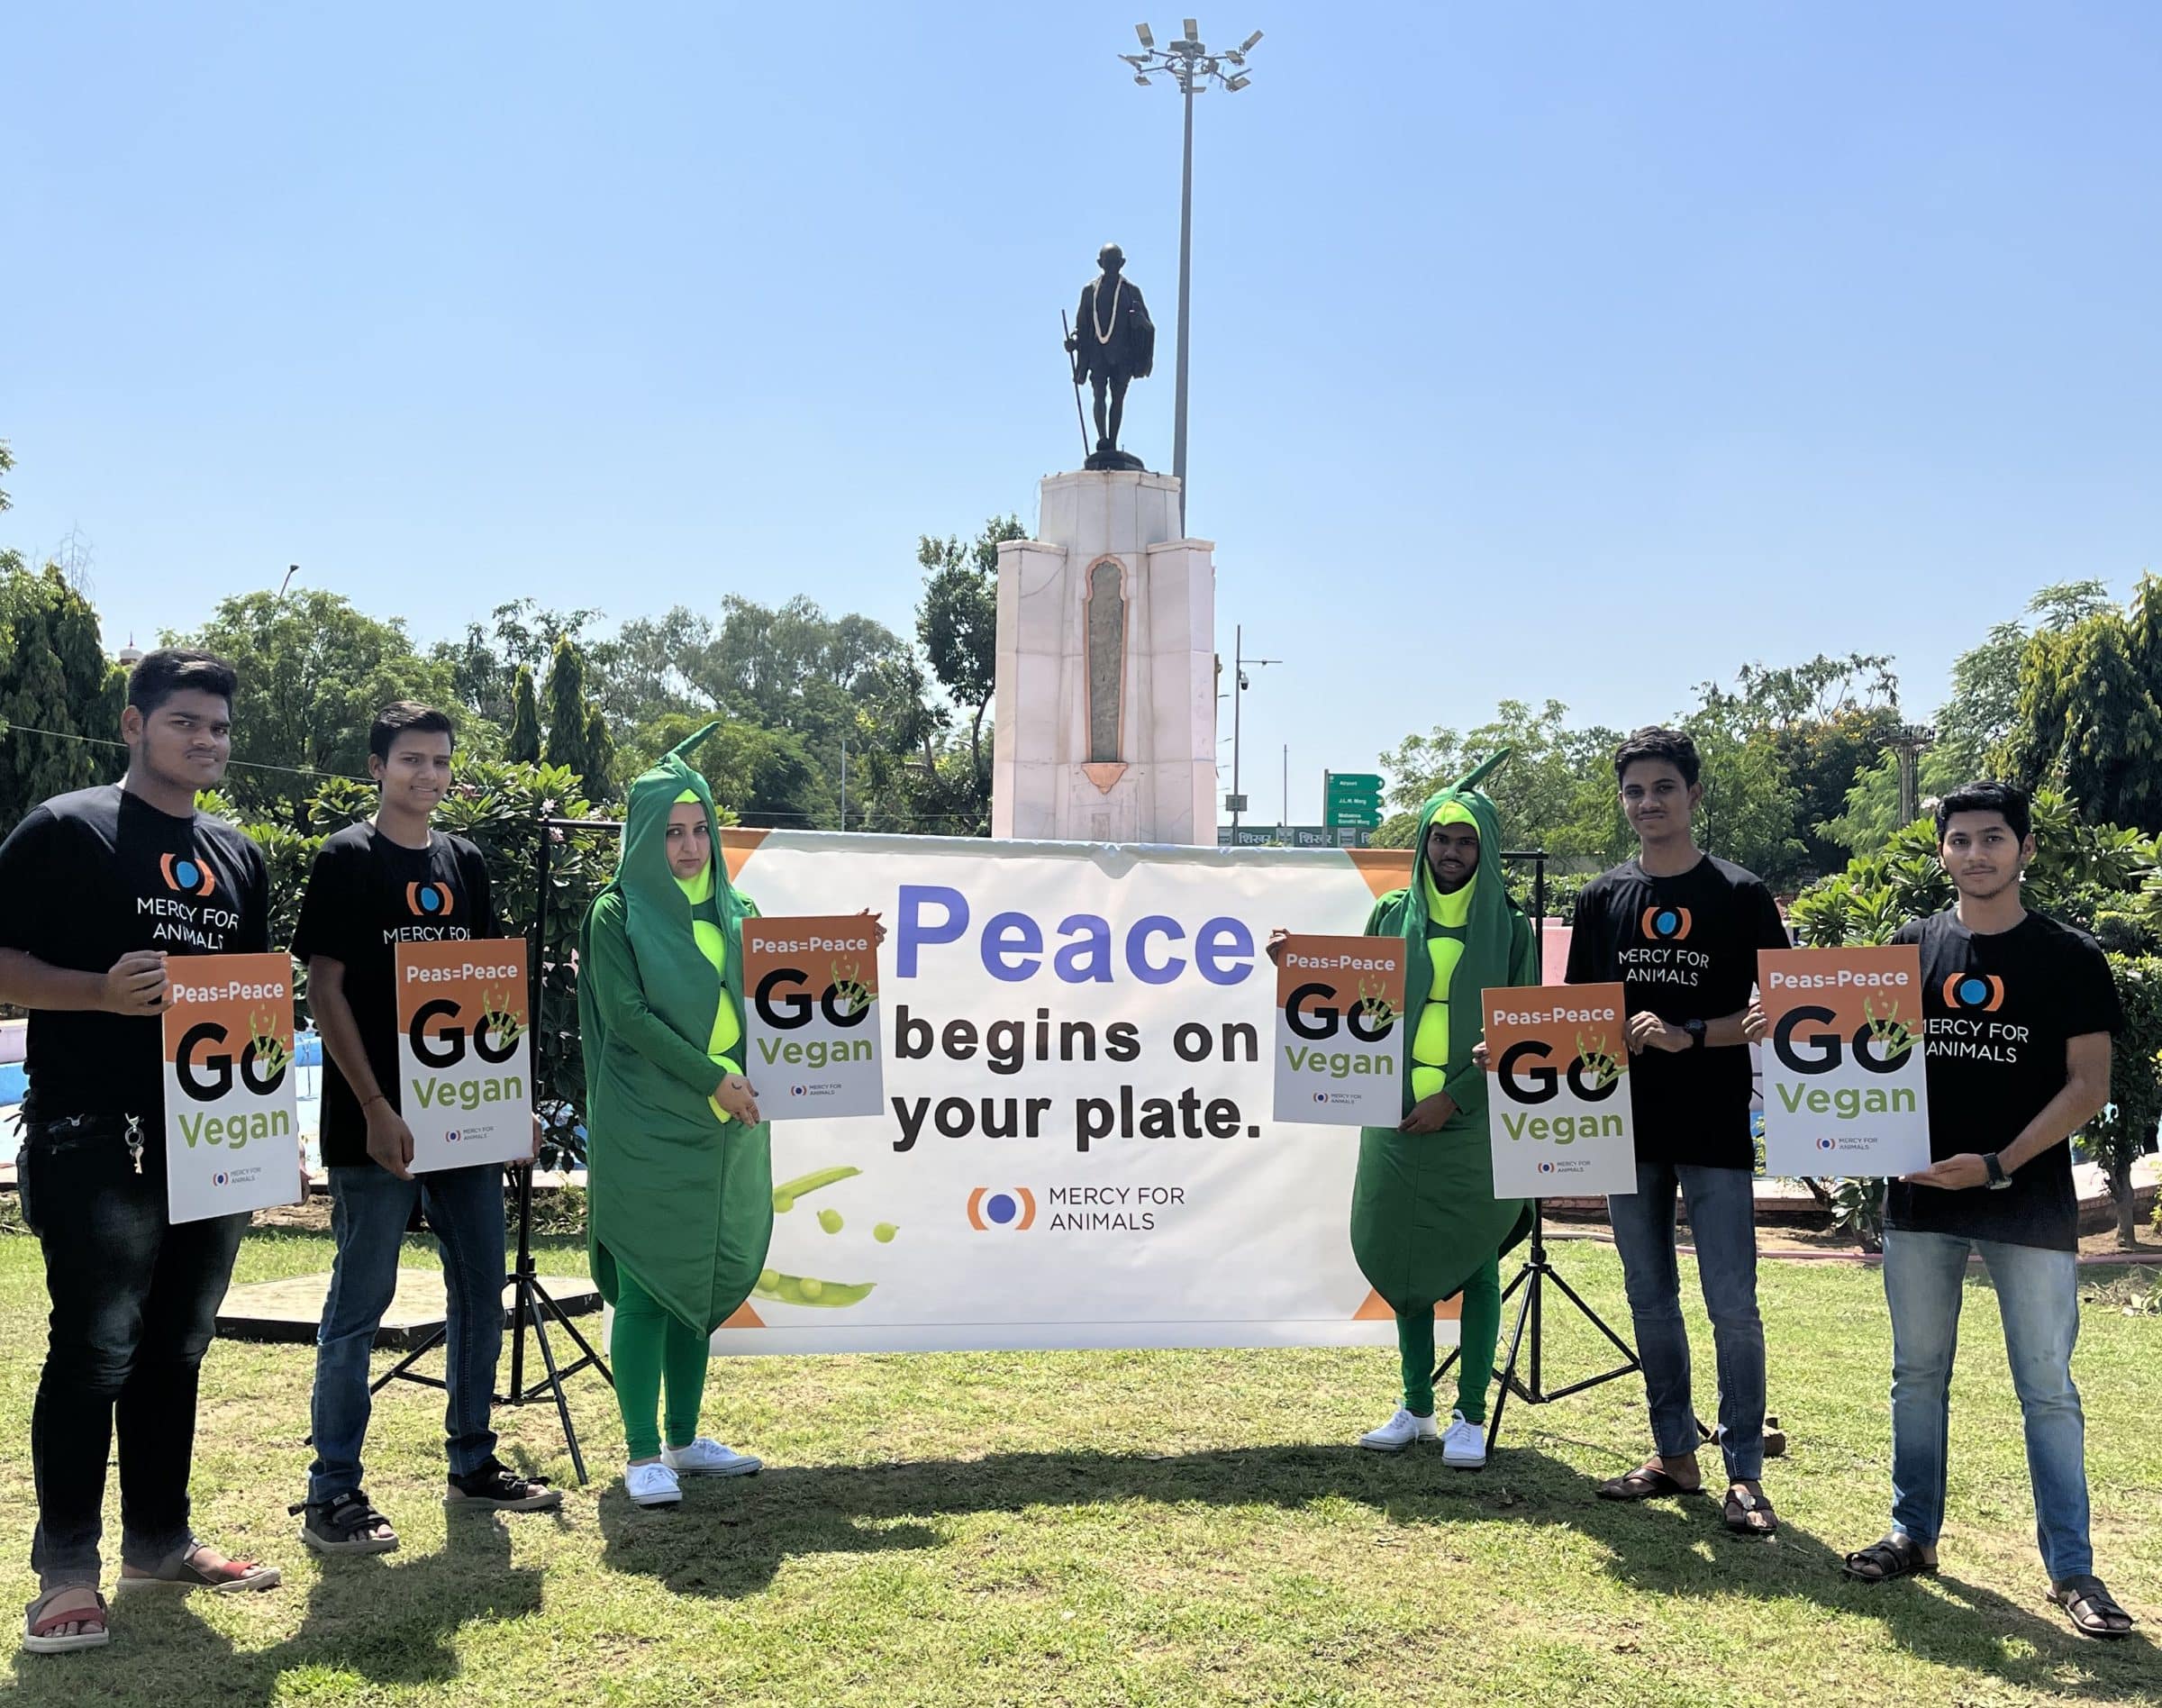 Banner held for Peas for Peace